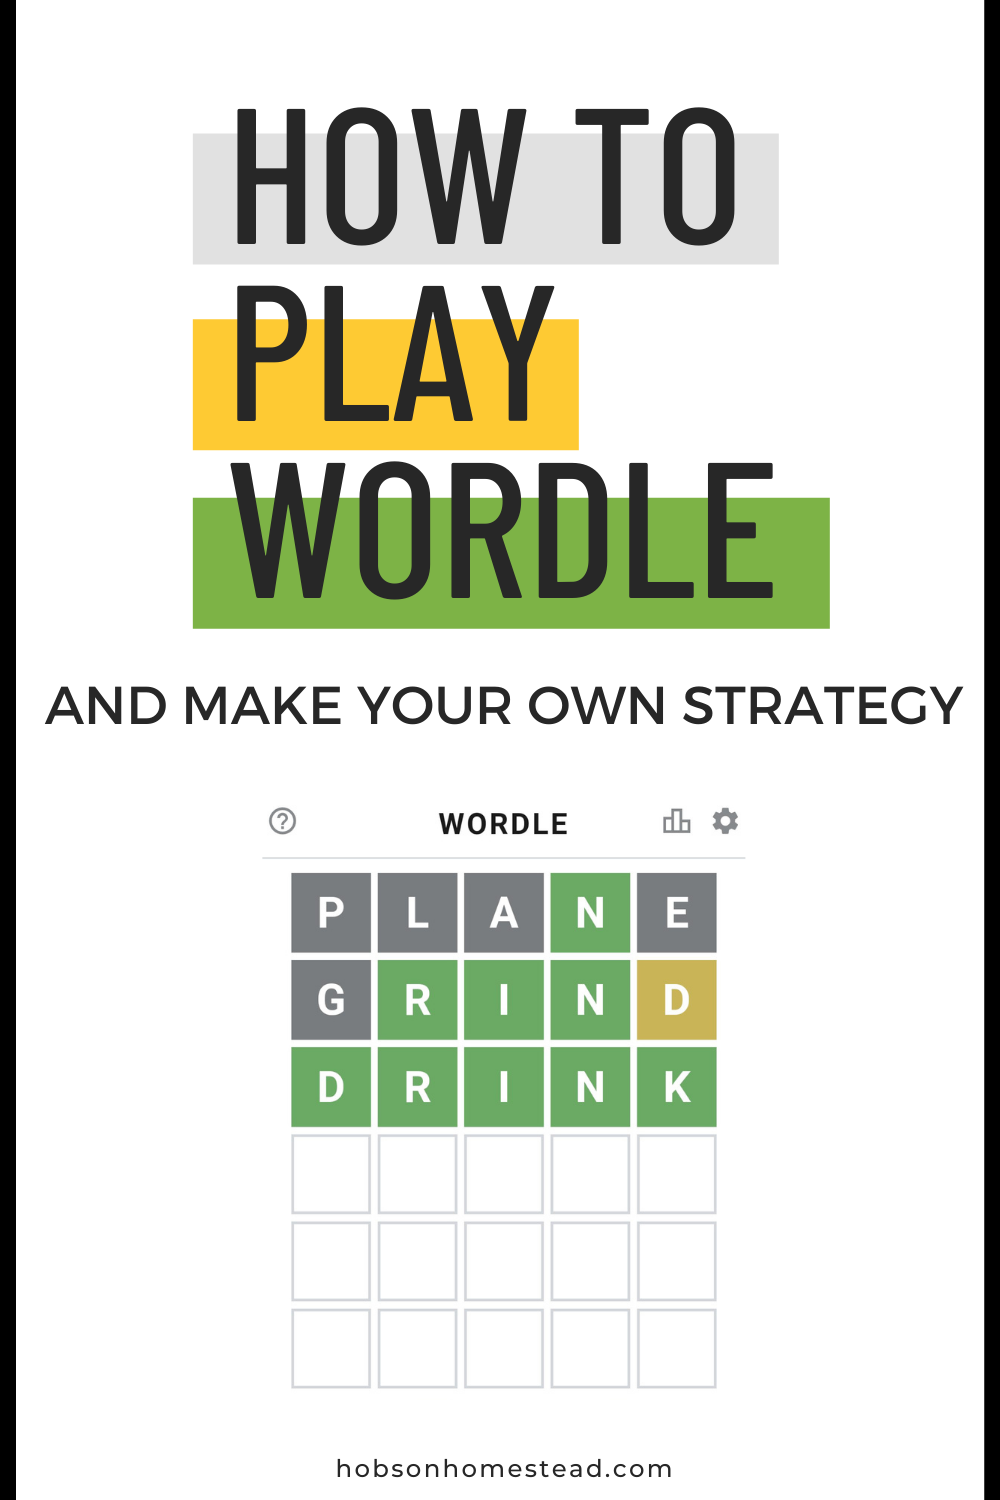 How to Play Wordle and Make Your Own Wordle Strategy